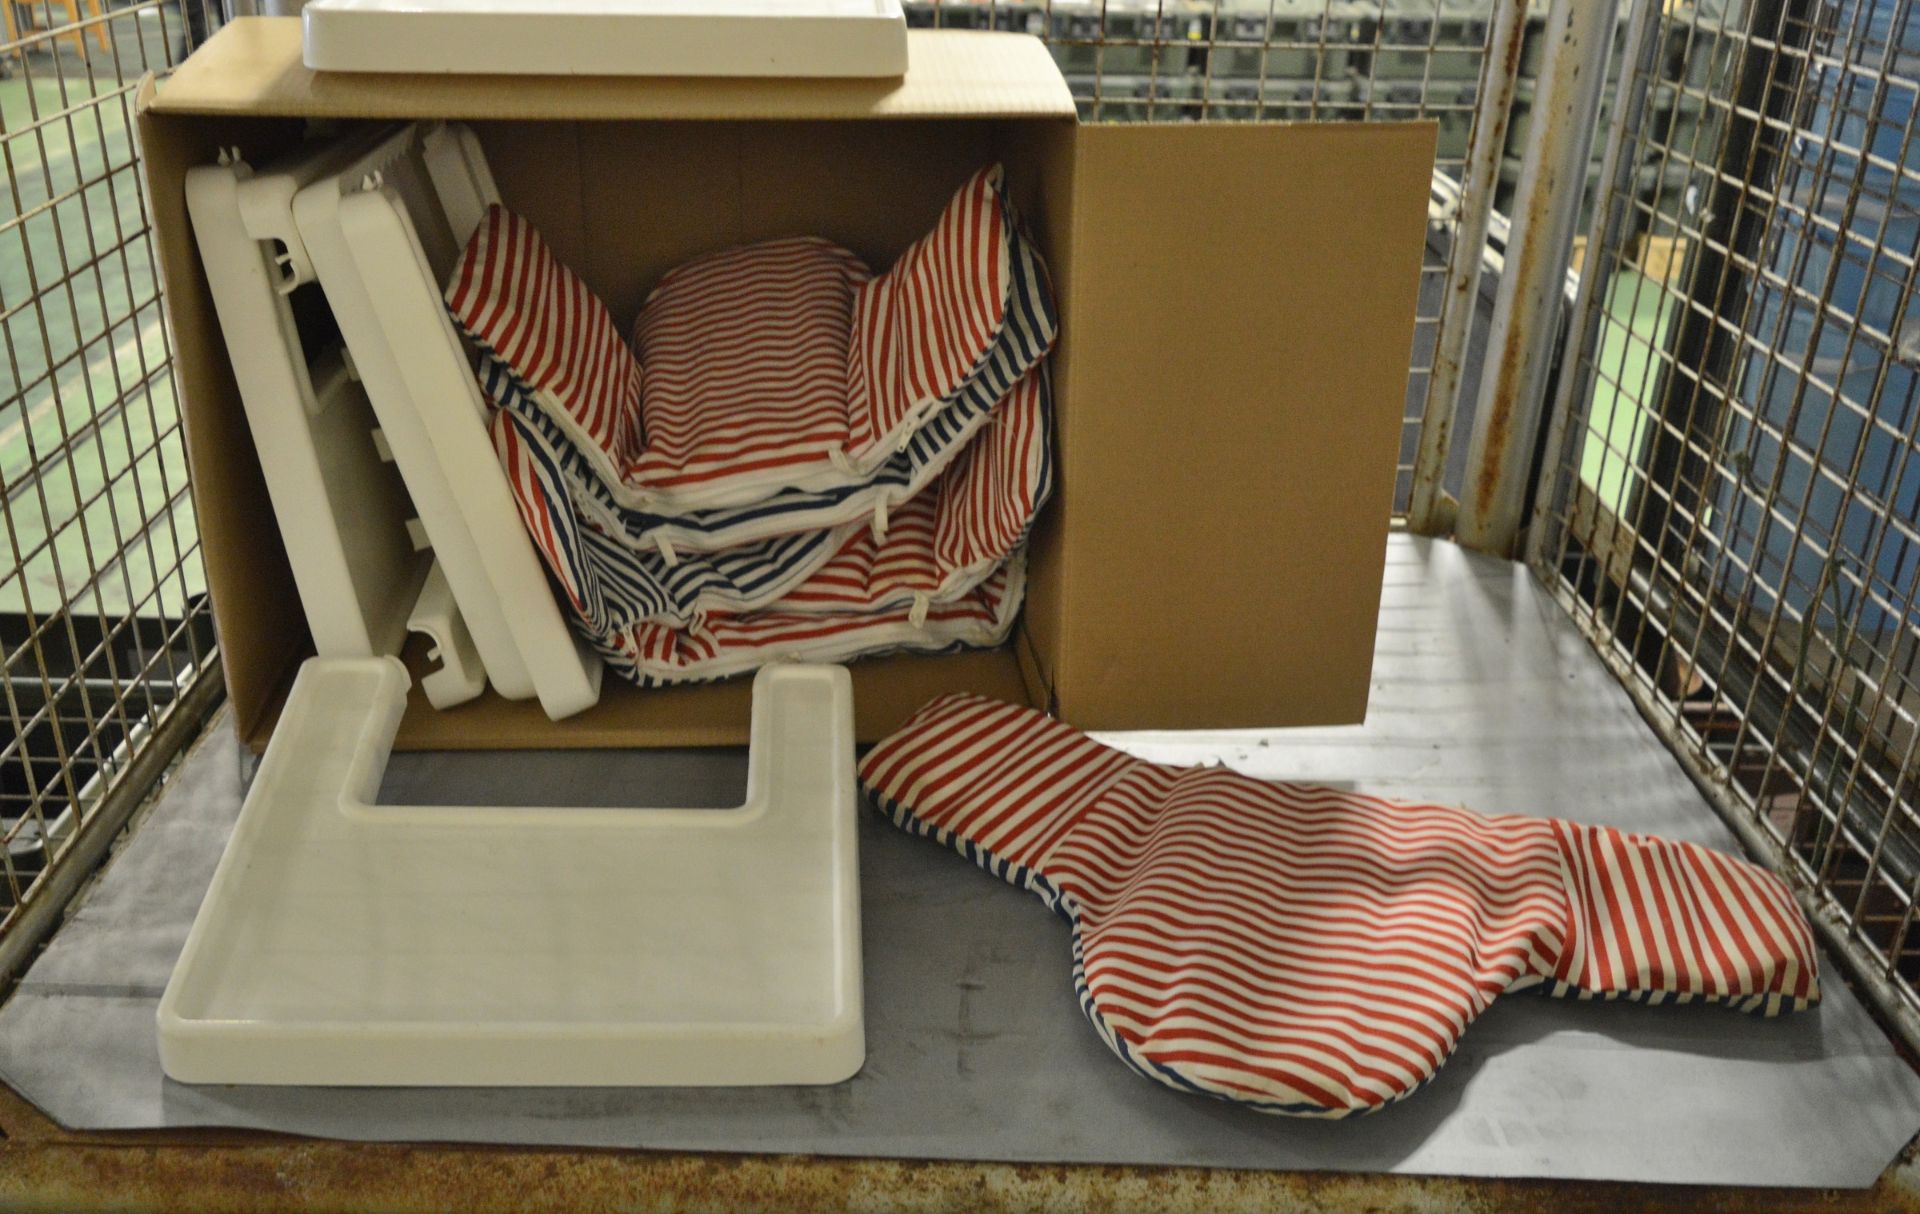 High chair tables (no legs), striped covers